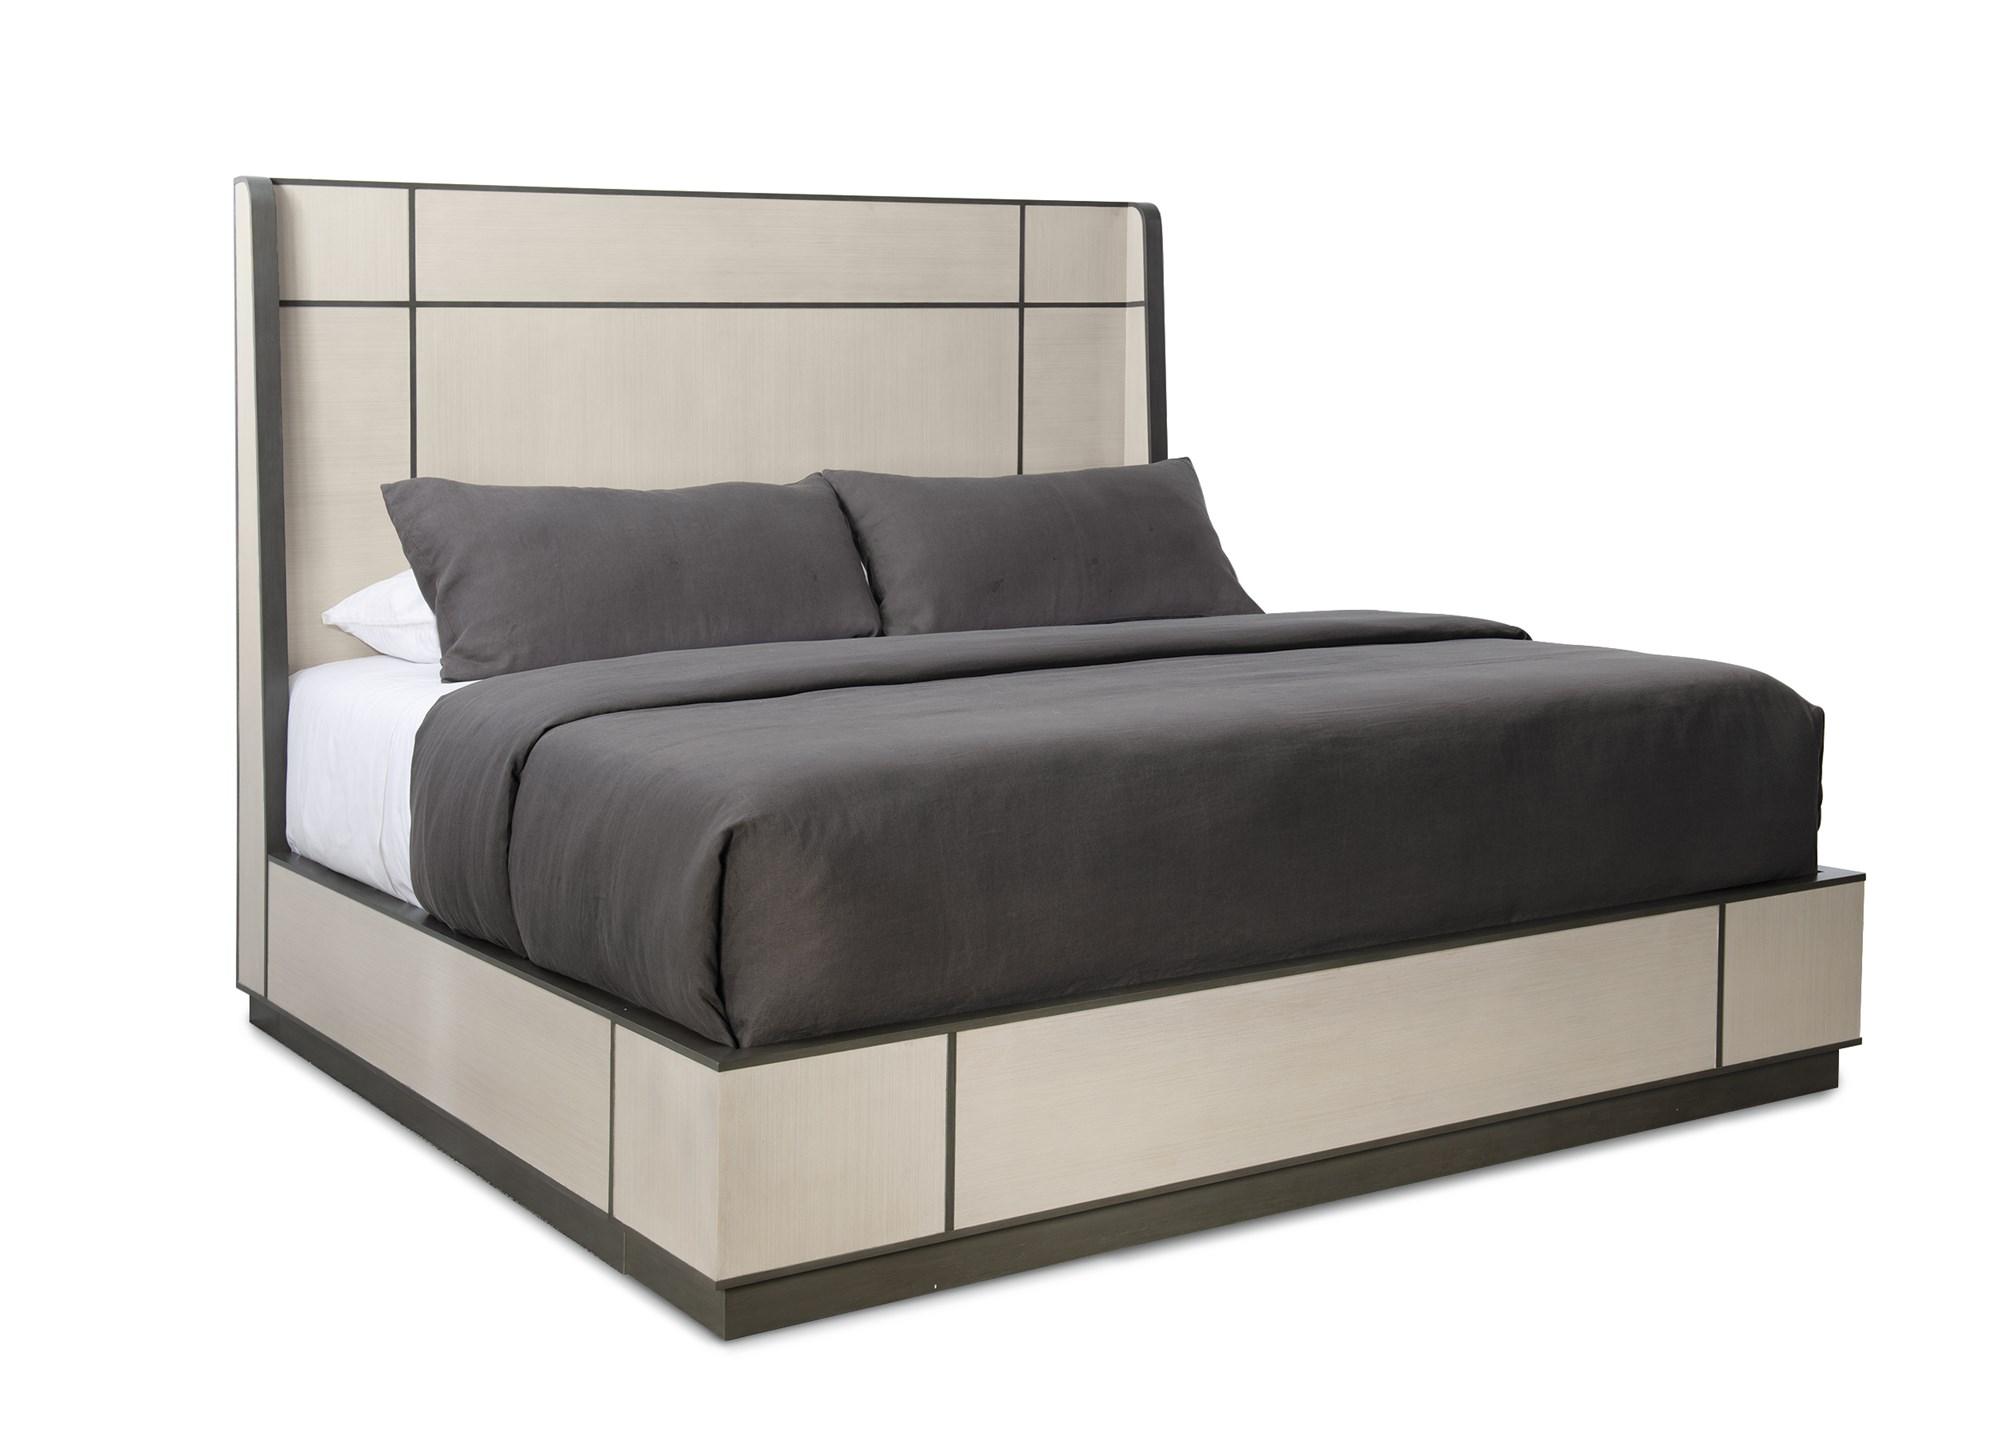 Contemporary Platform Bed REPETITION WOOD BED M123-420-101 in Ash Gray 